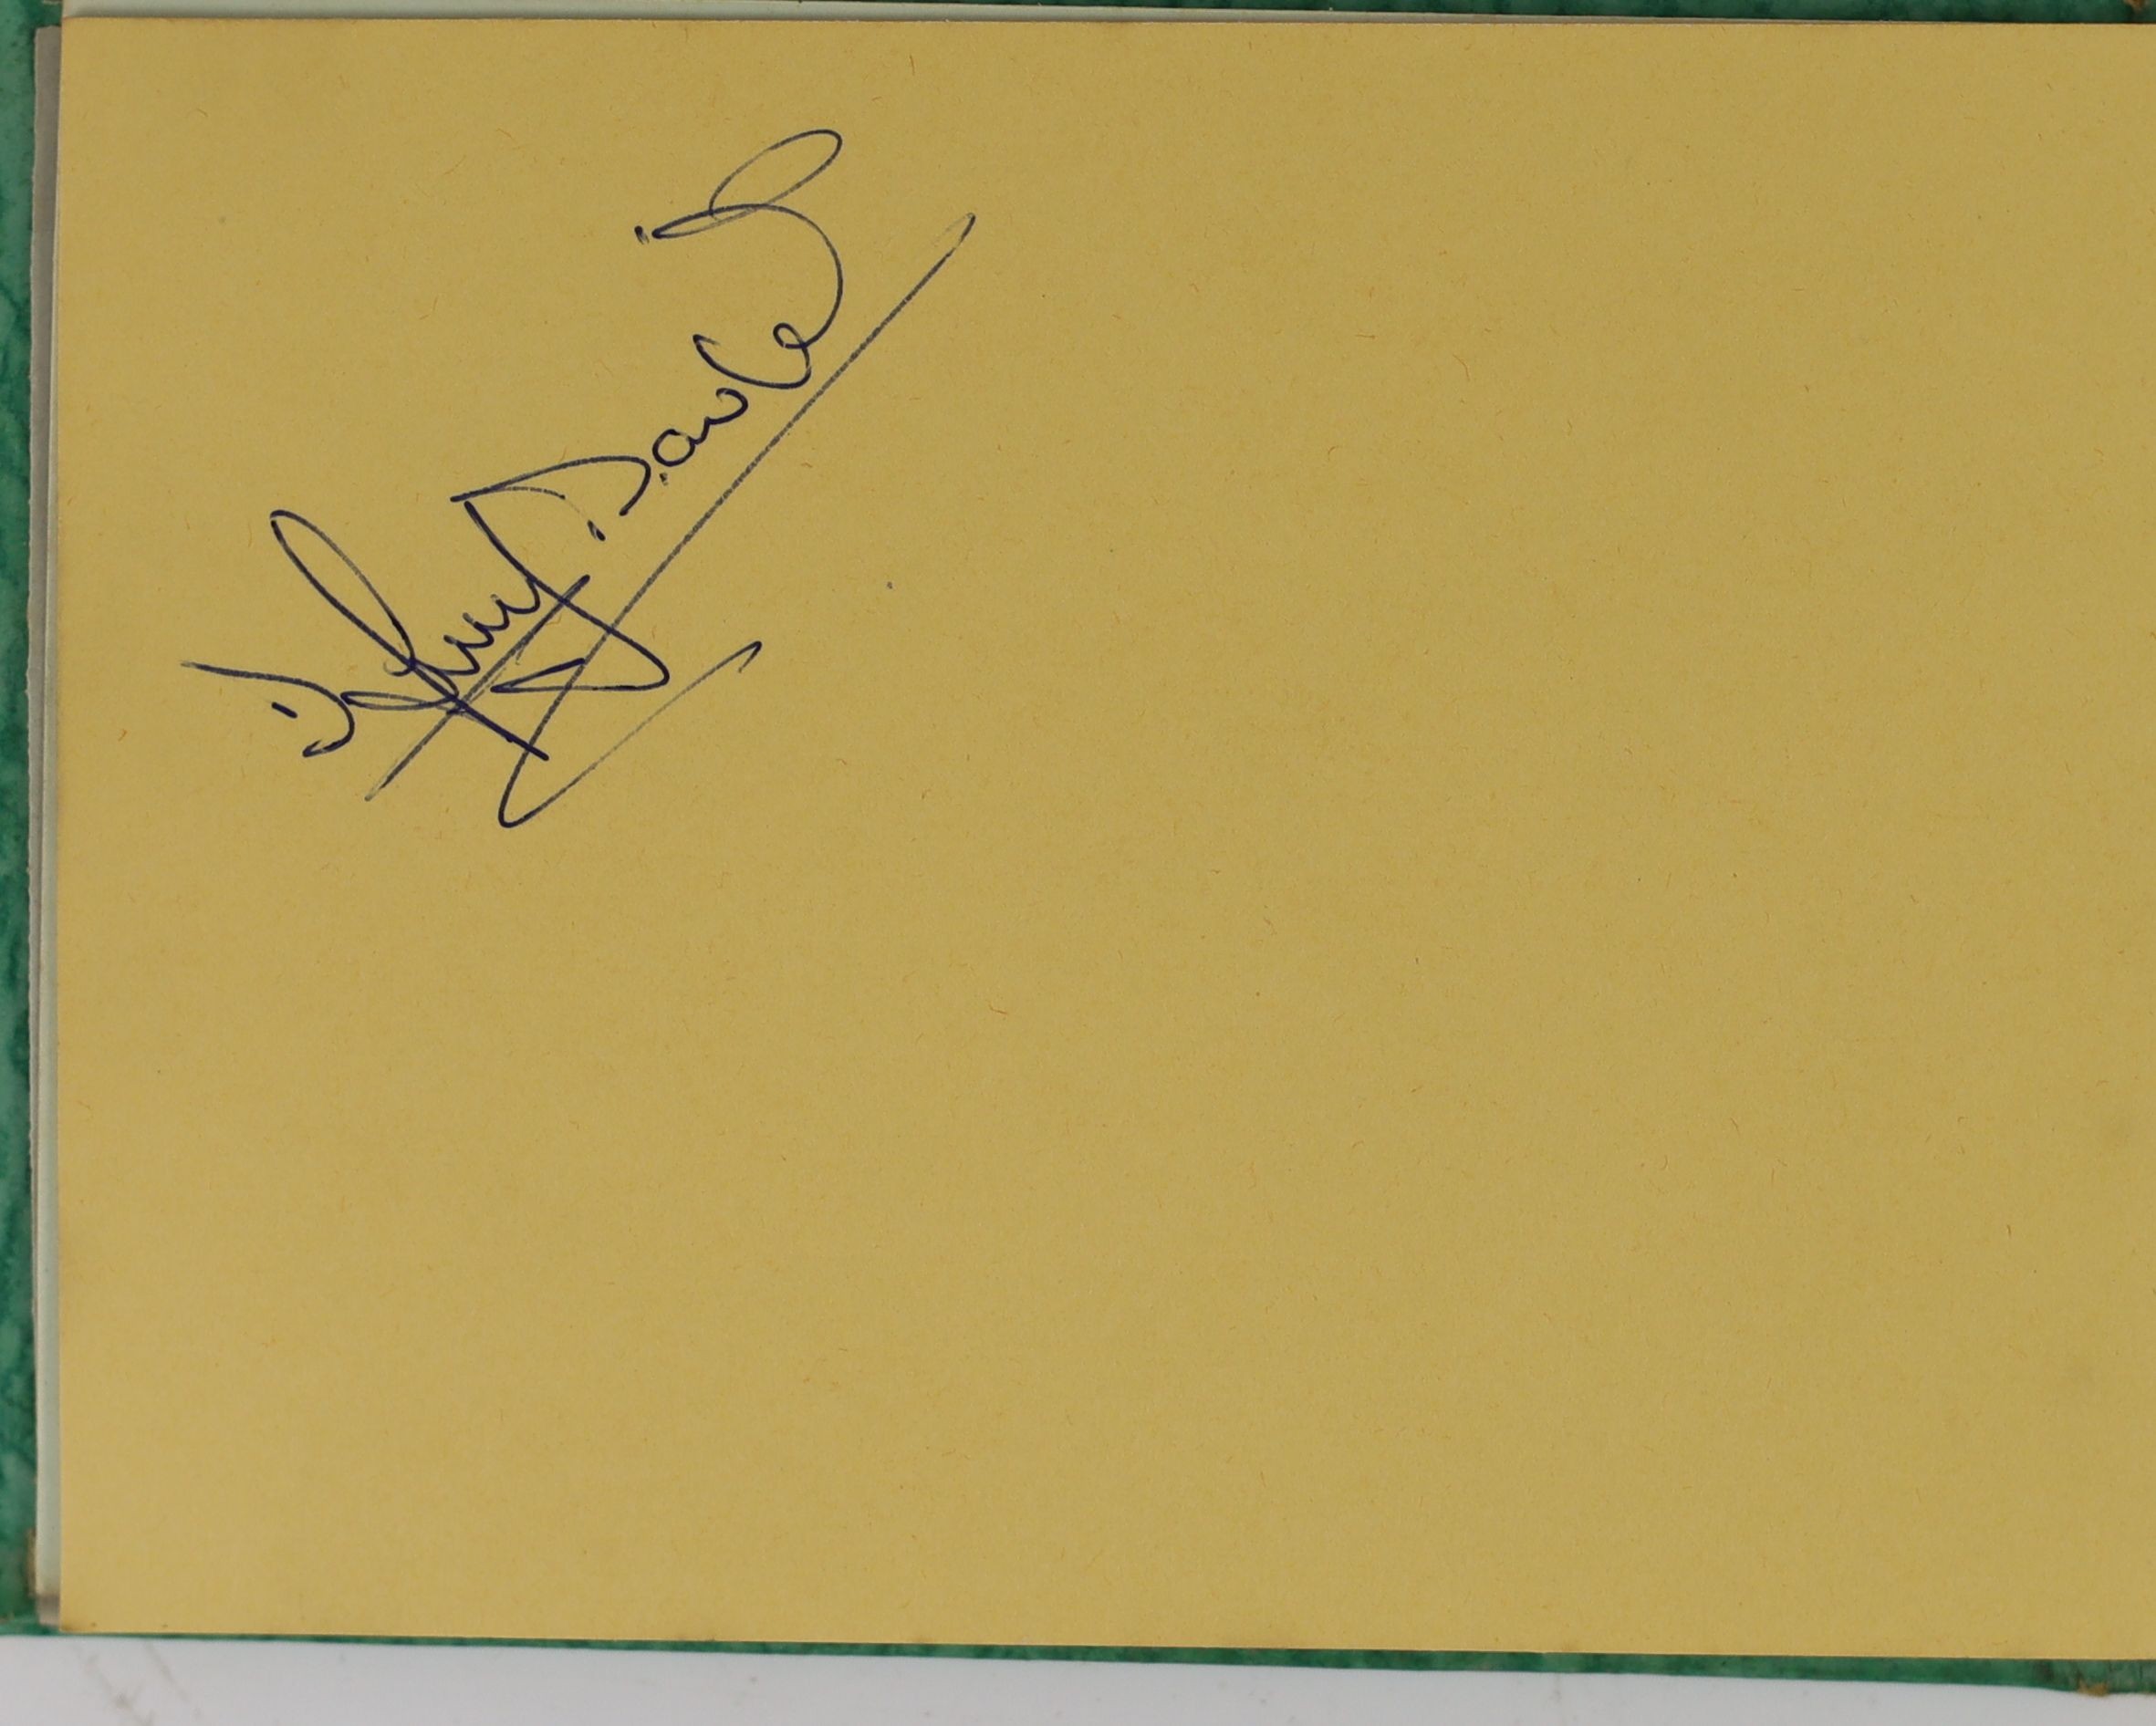 An Autograph album dated 1962 with a single signed page with The Beatles 10 x 13.5cm.